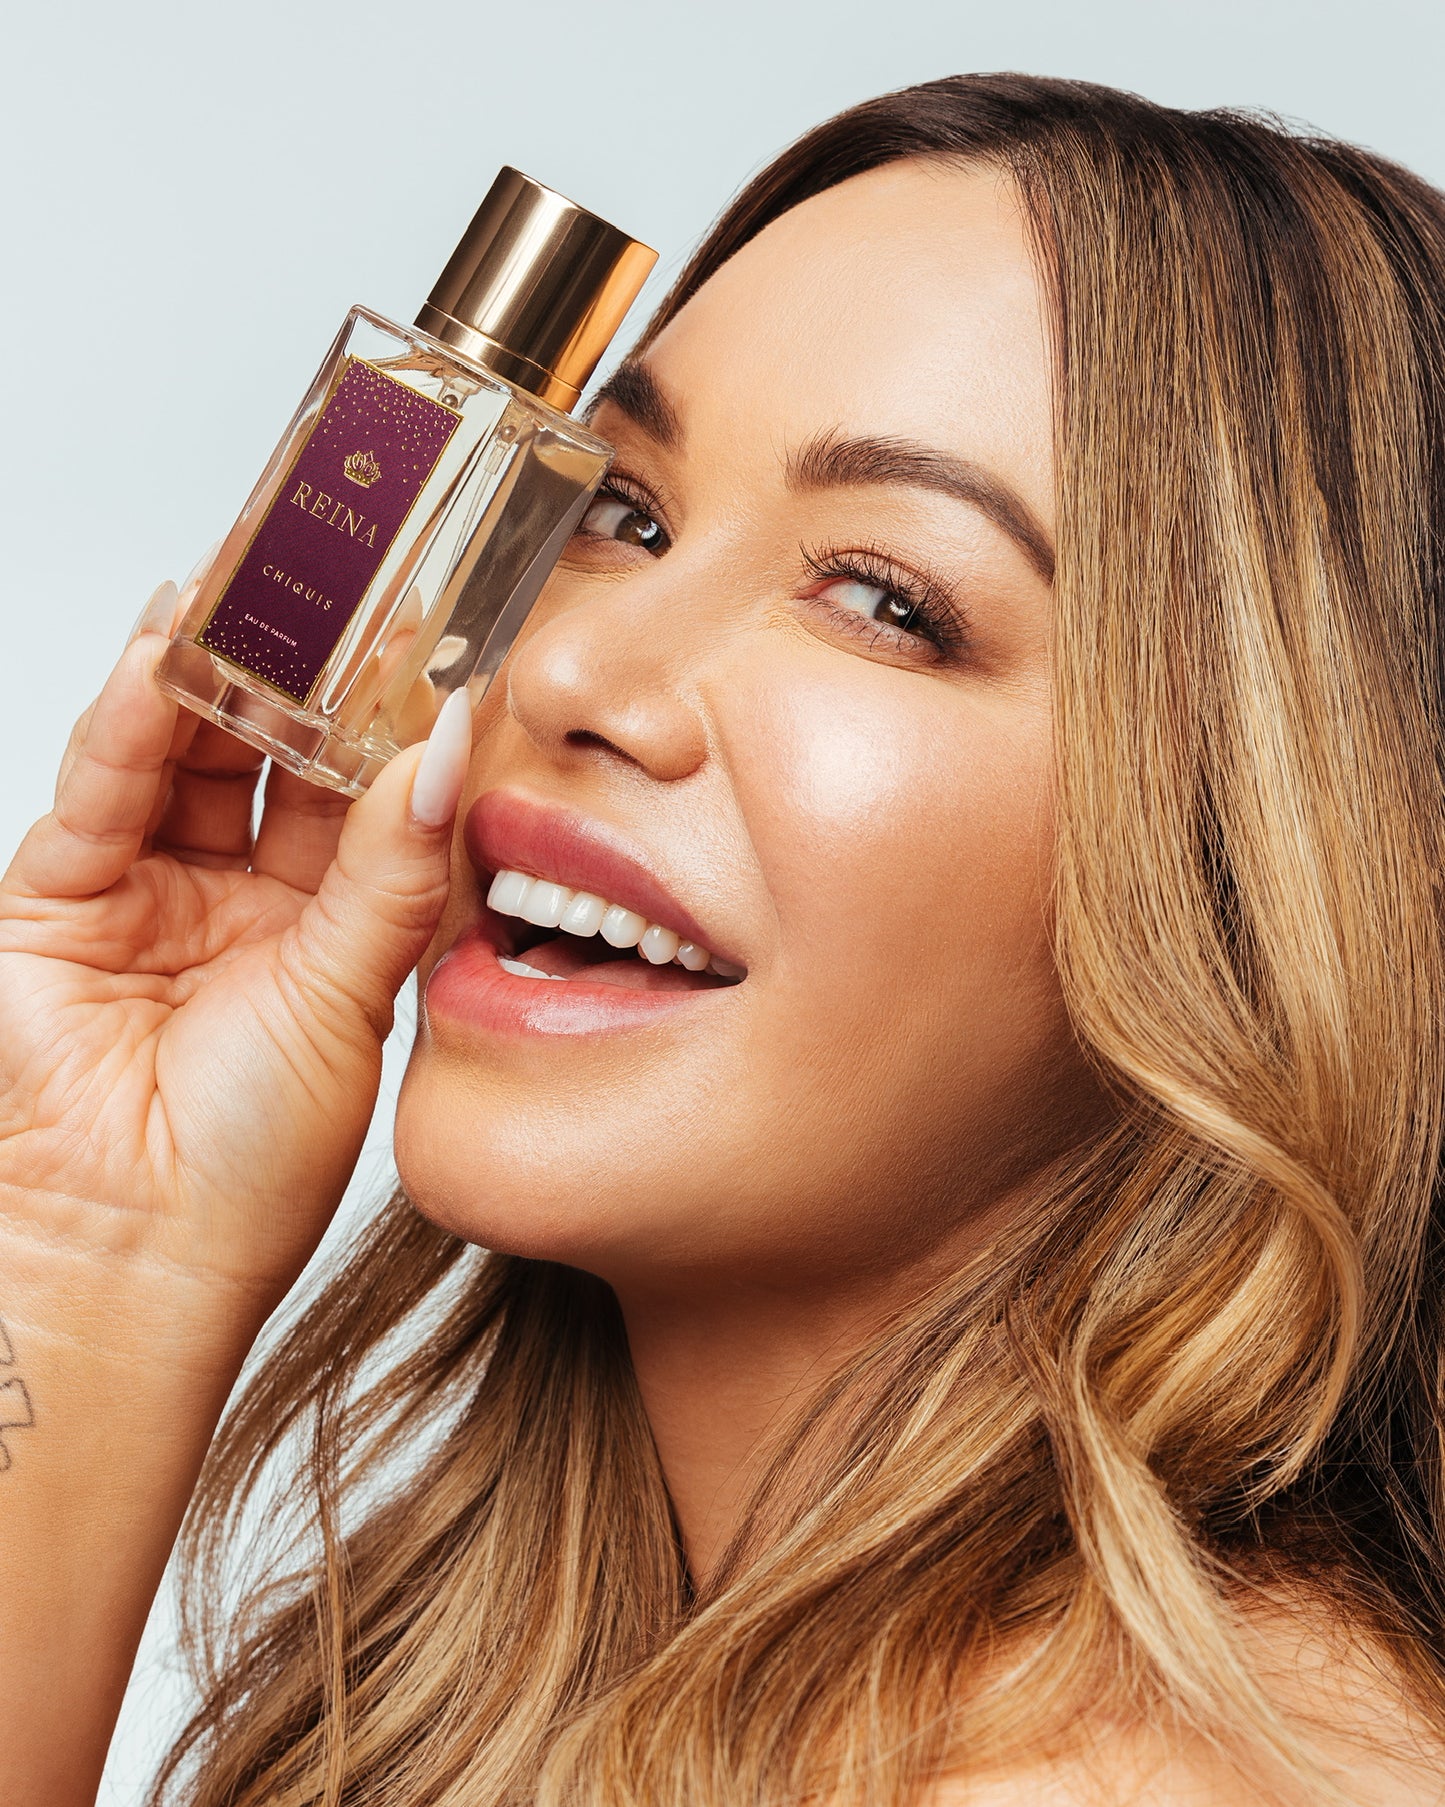 Reina Fragrance by Chiquis